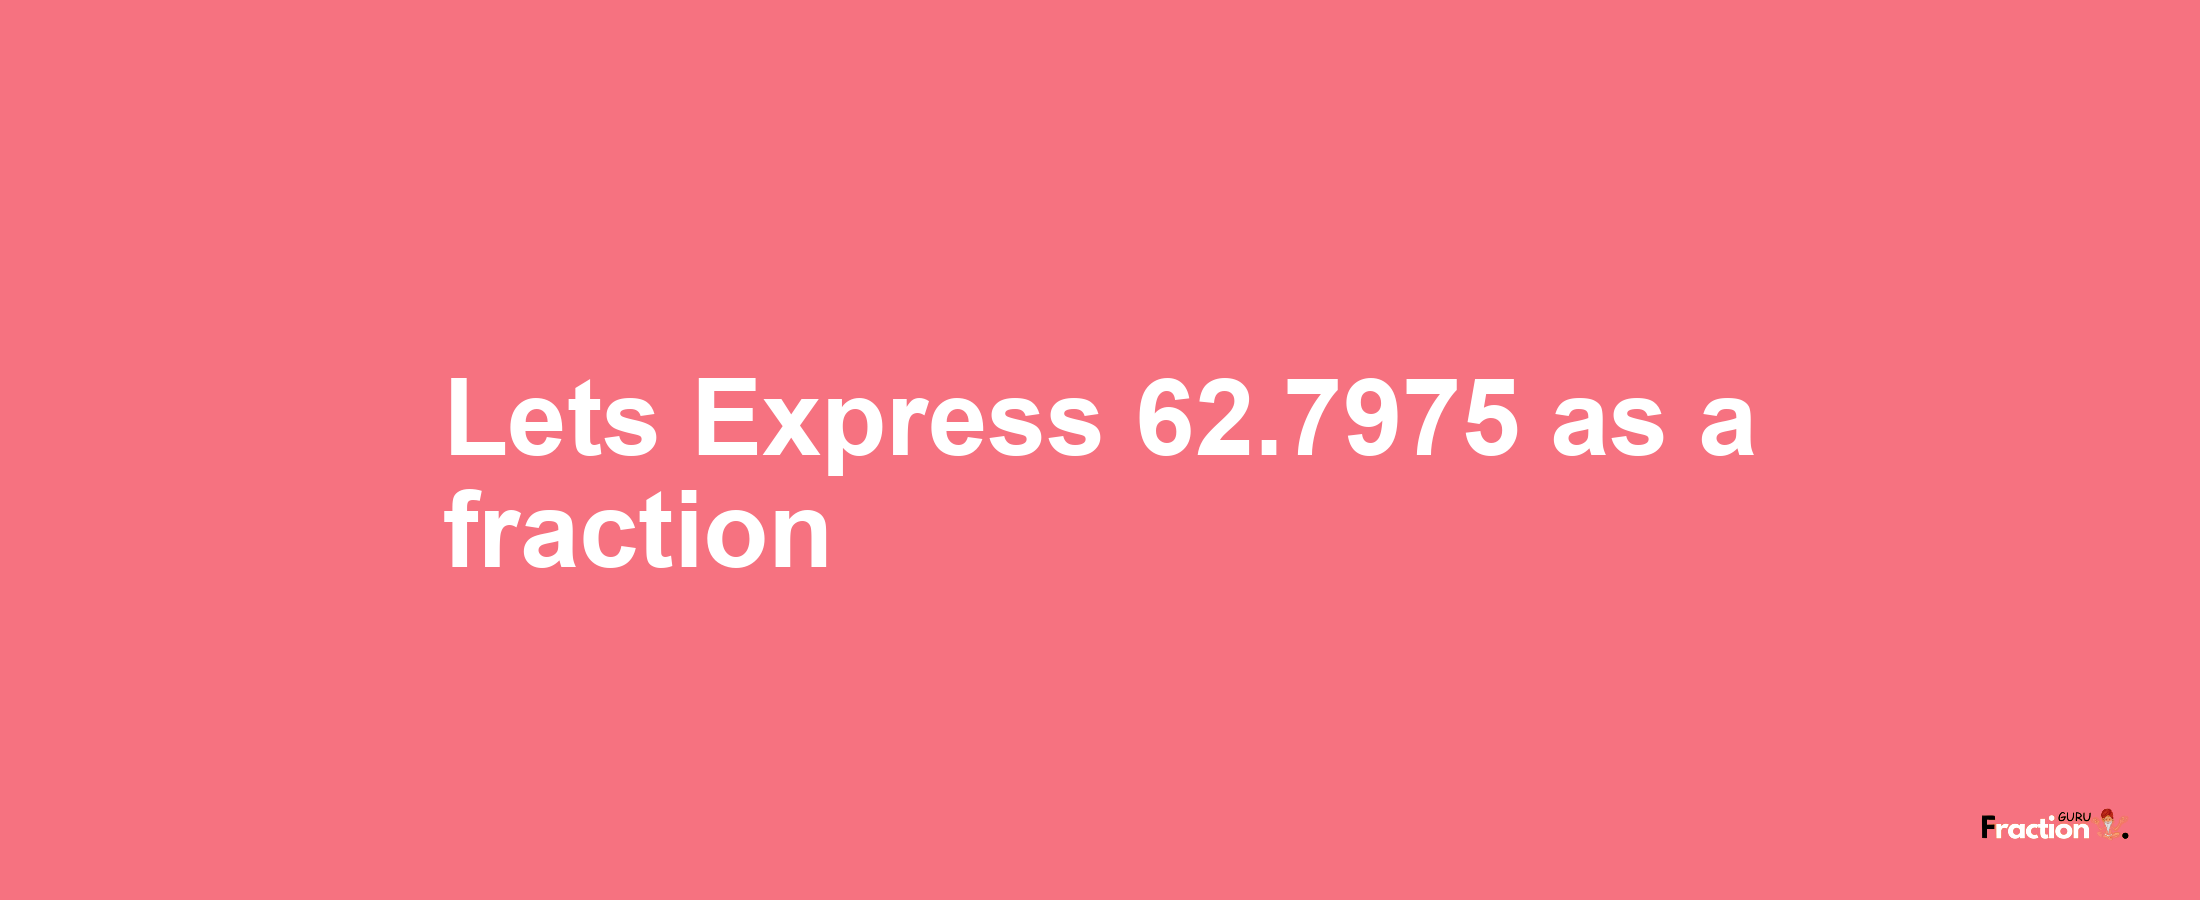 Lets Express 62.7975 as afraction